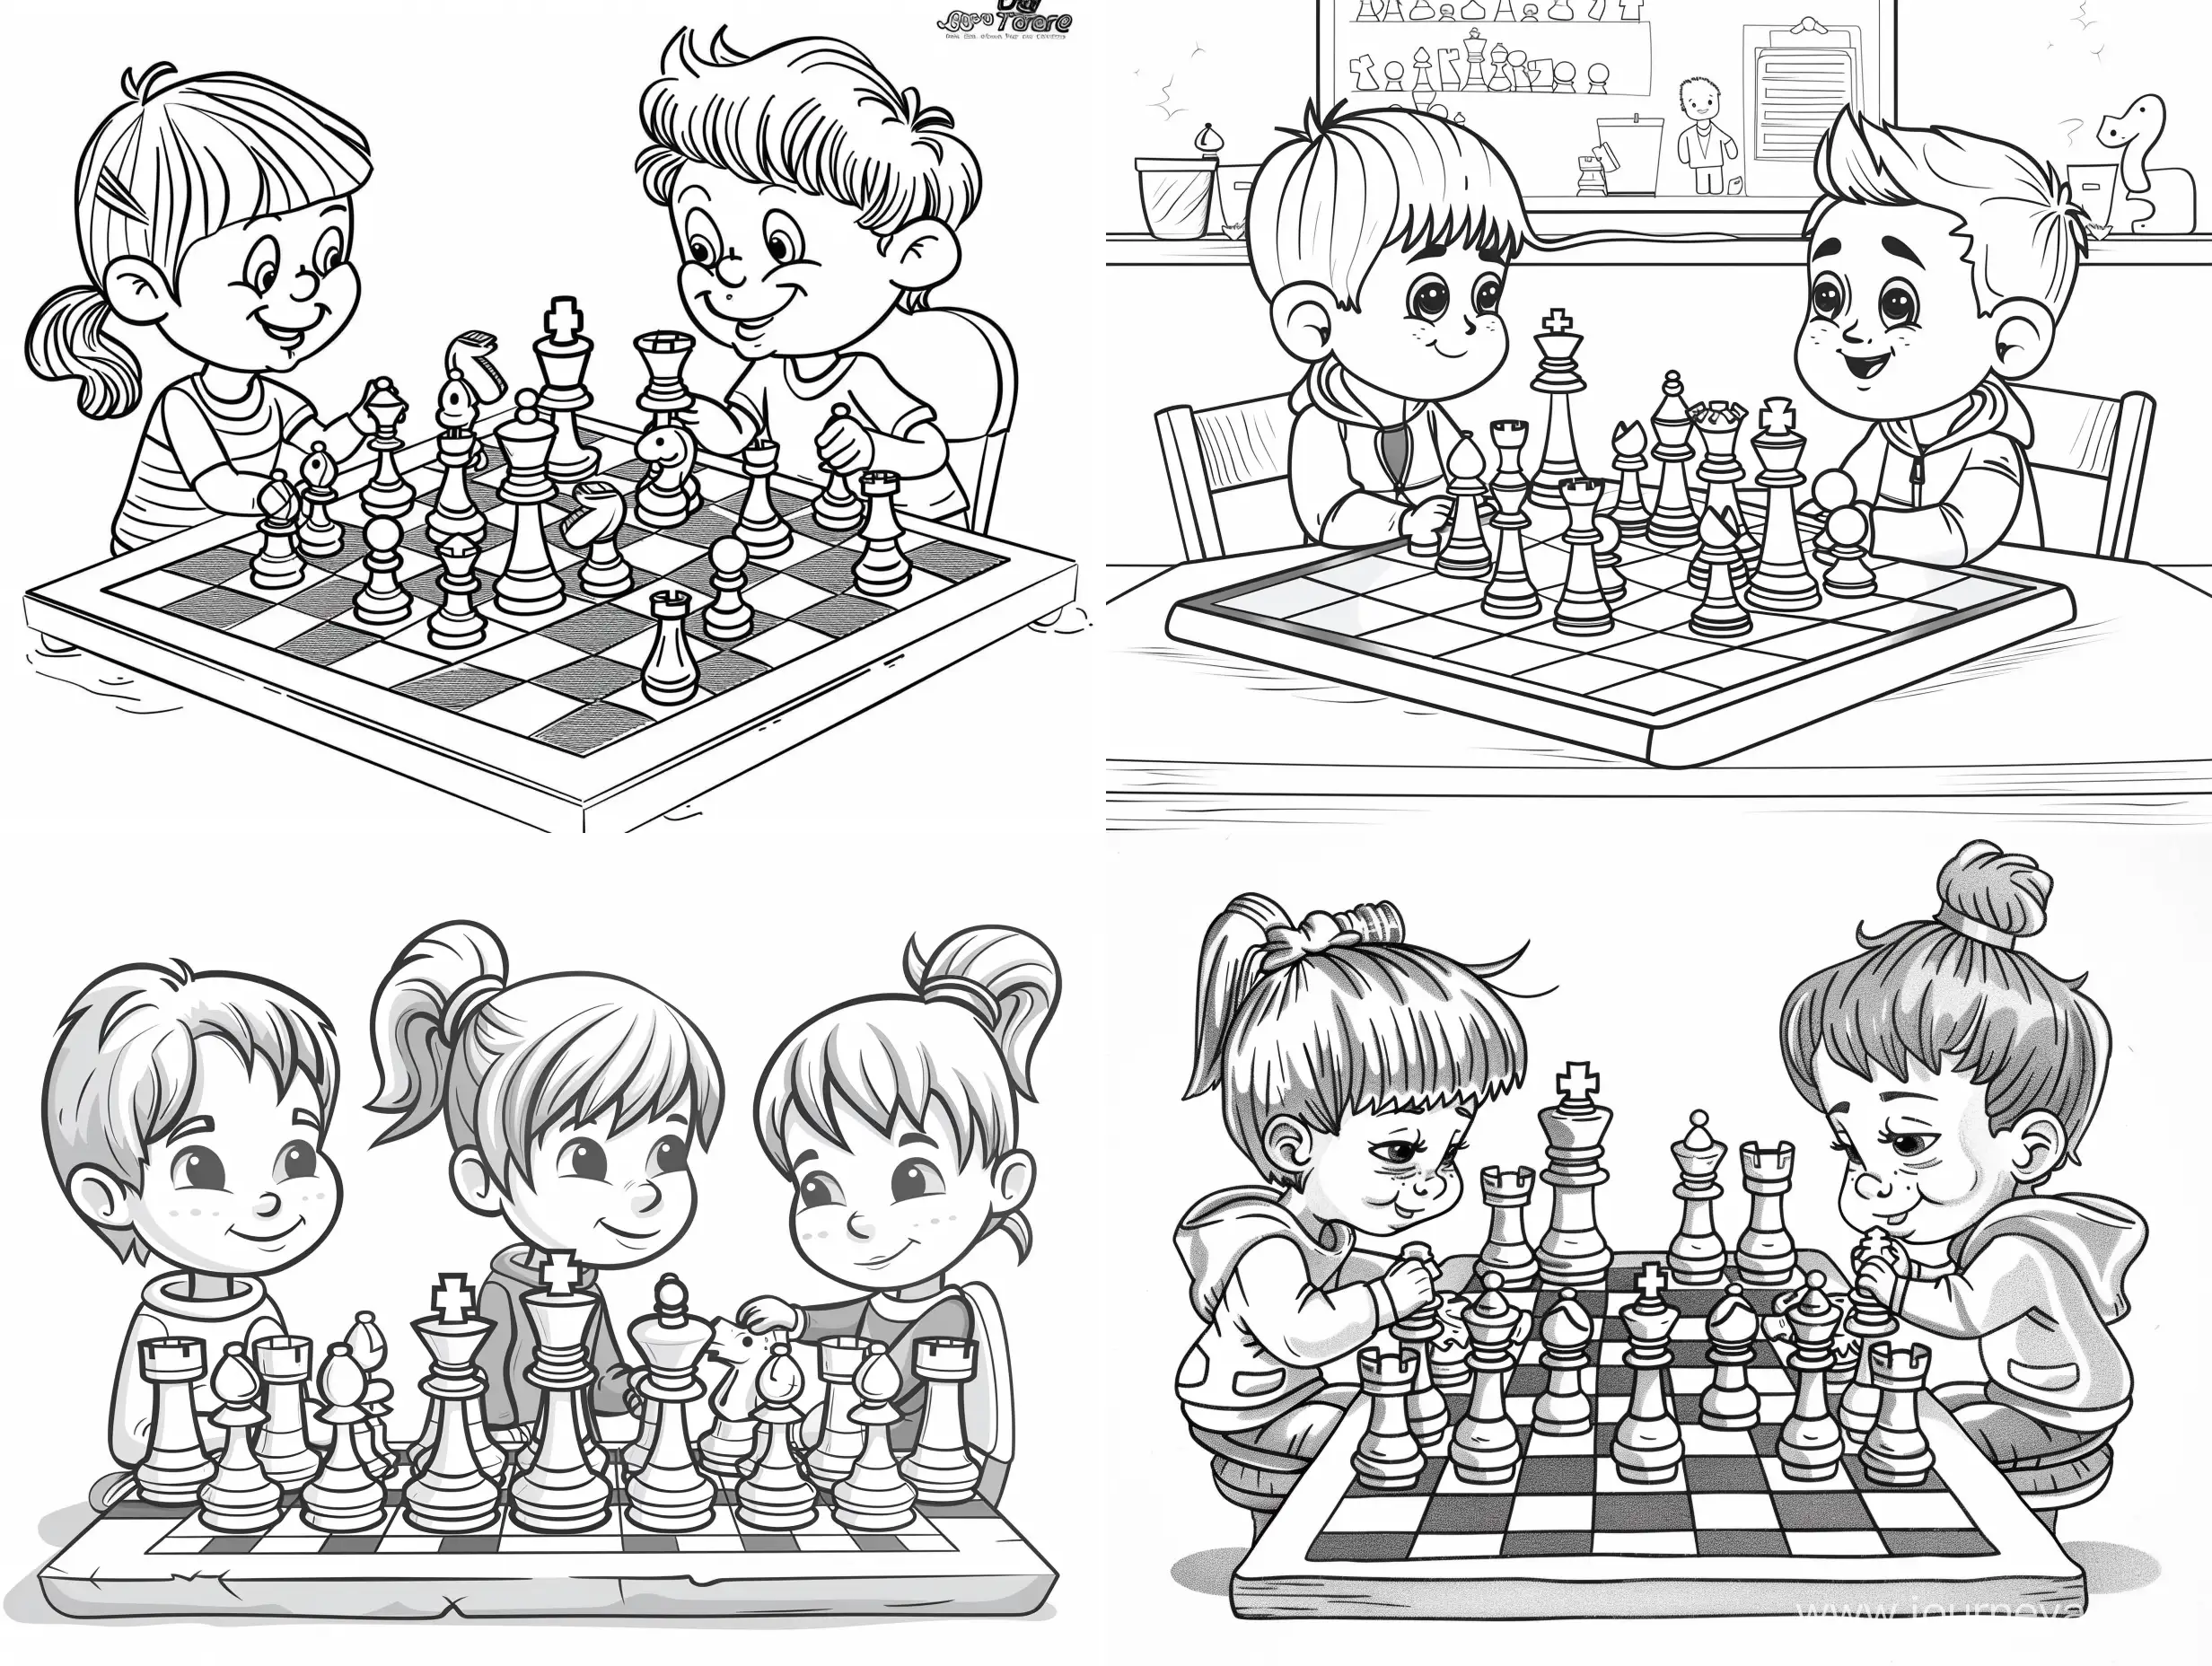 Whimsical-Childrens-Chess-Tournament-Coloring-Page